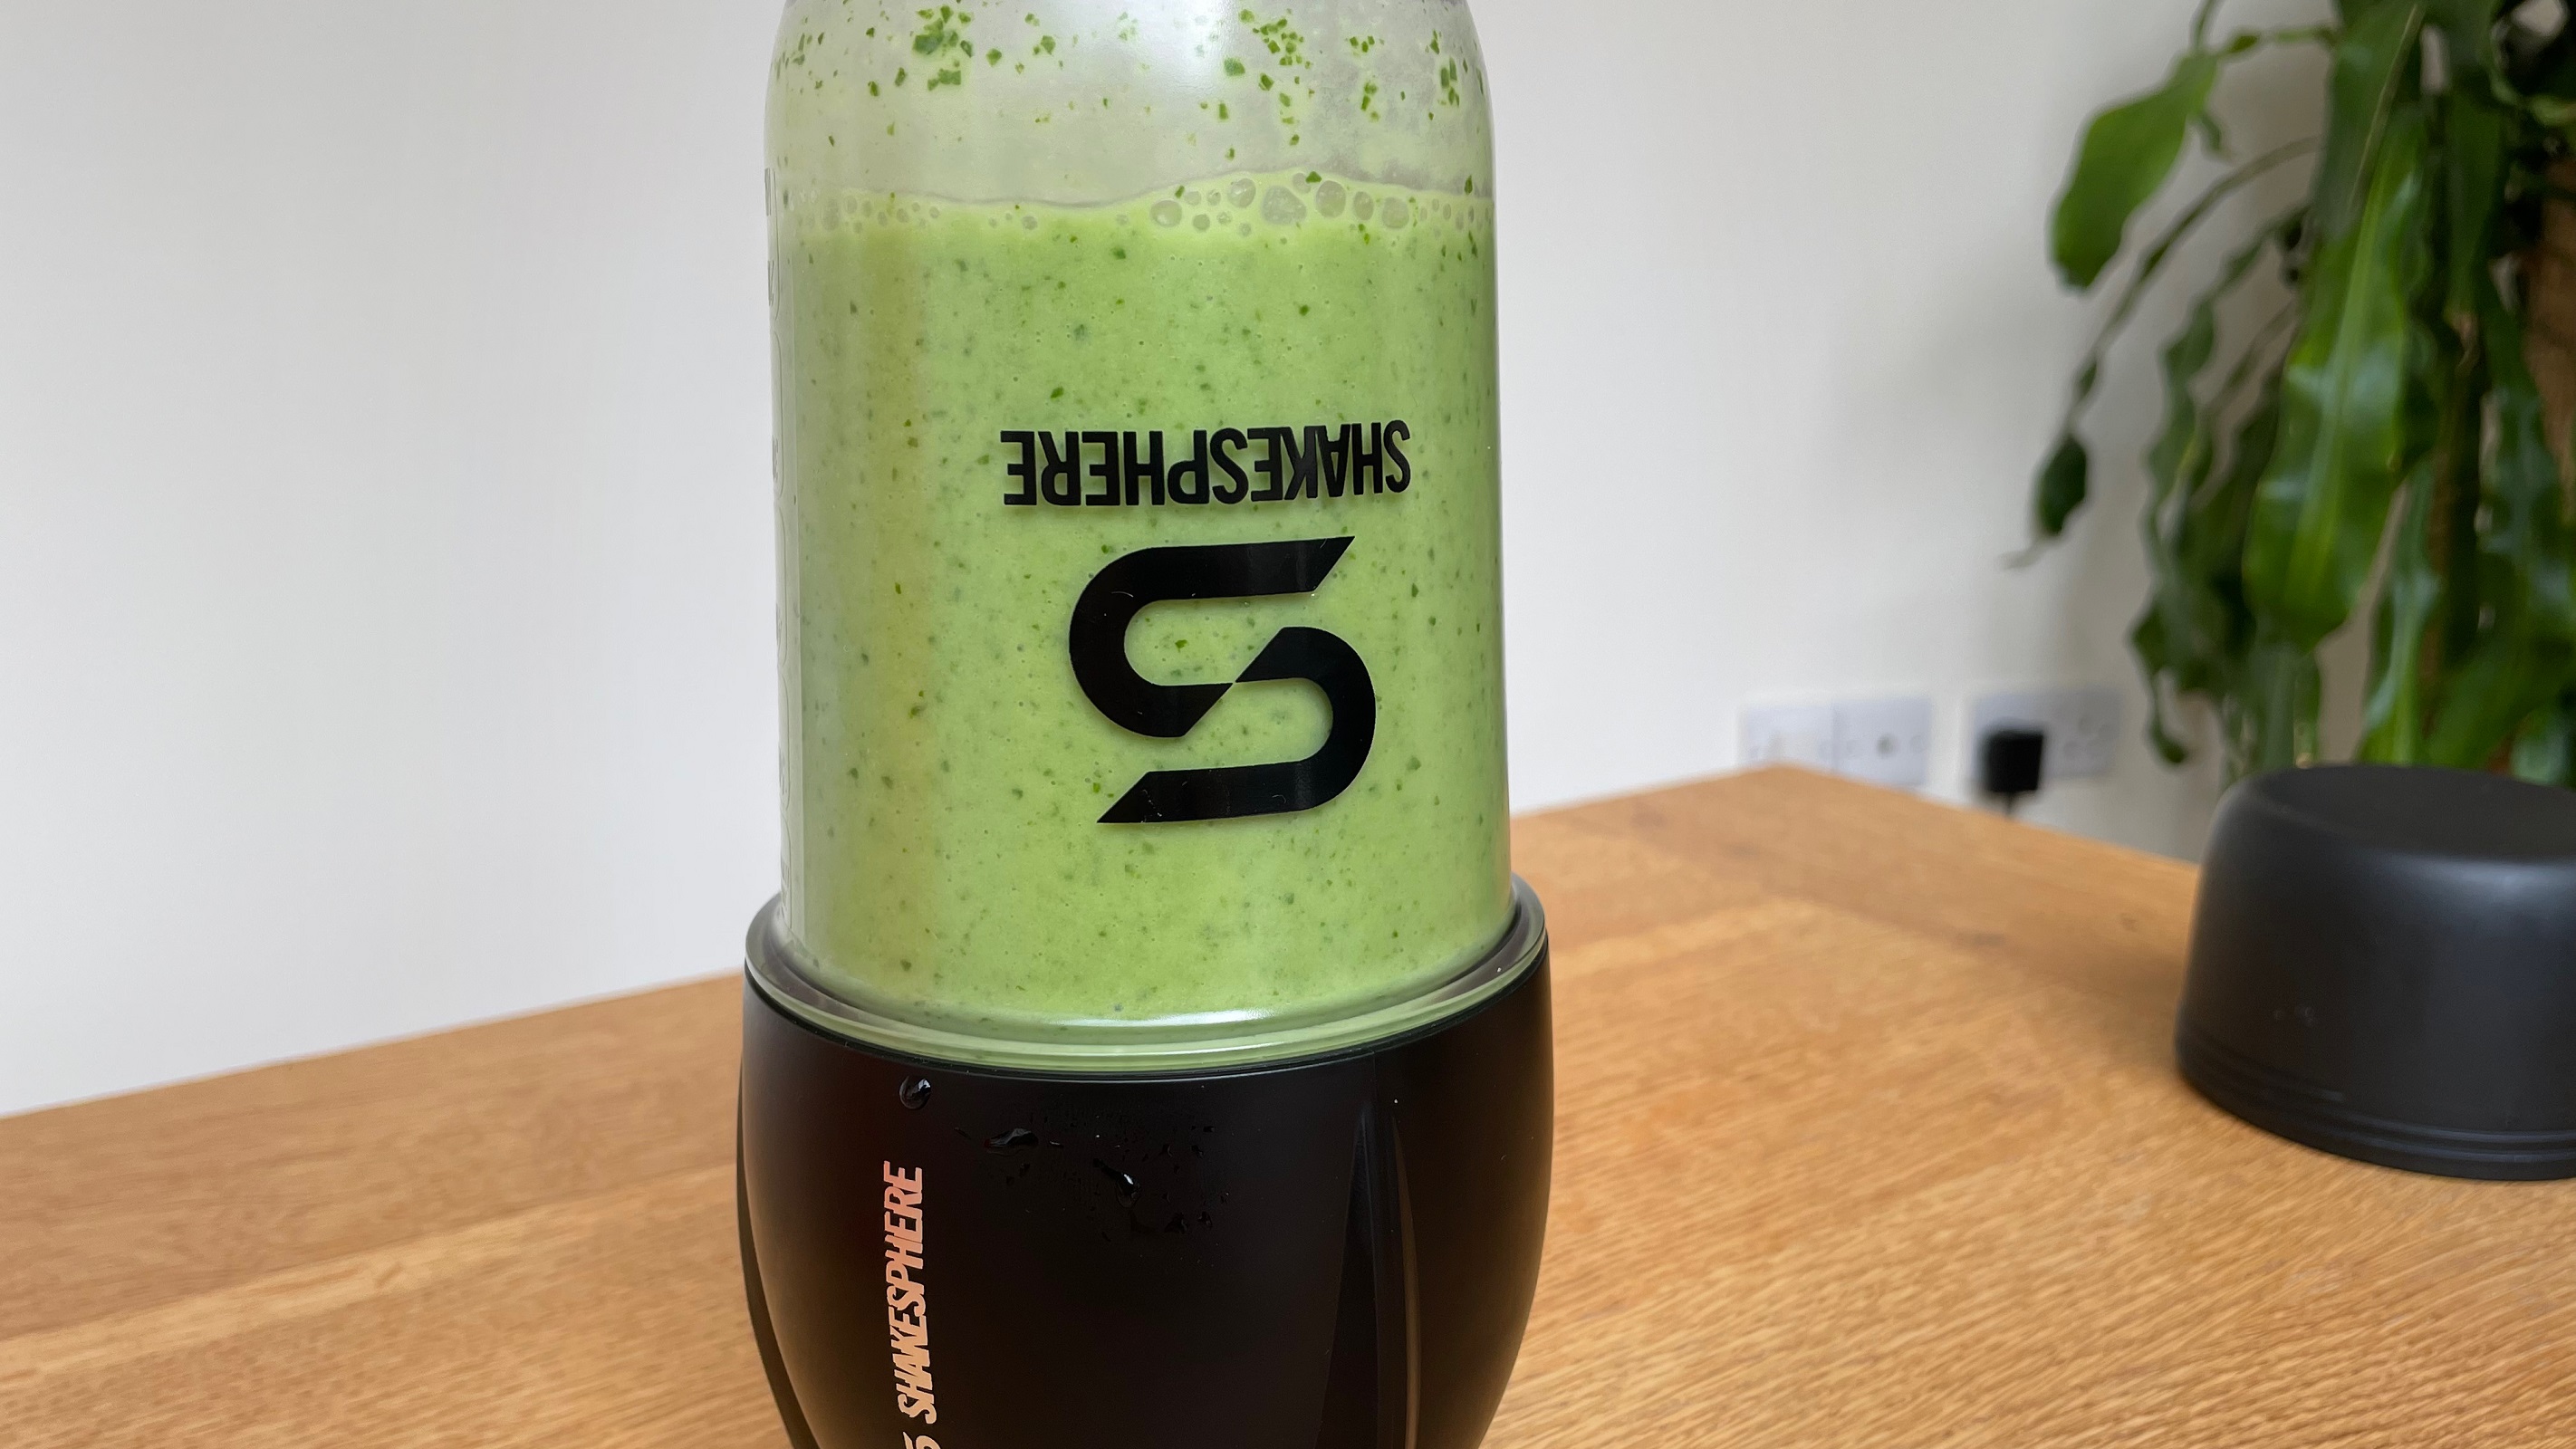 Making a green smoothie in the Shakesphere blender took just one cycle